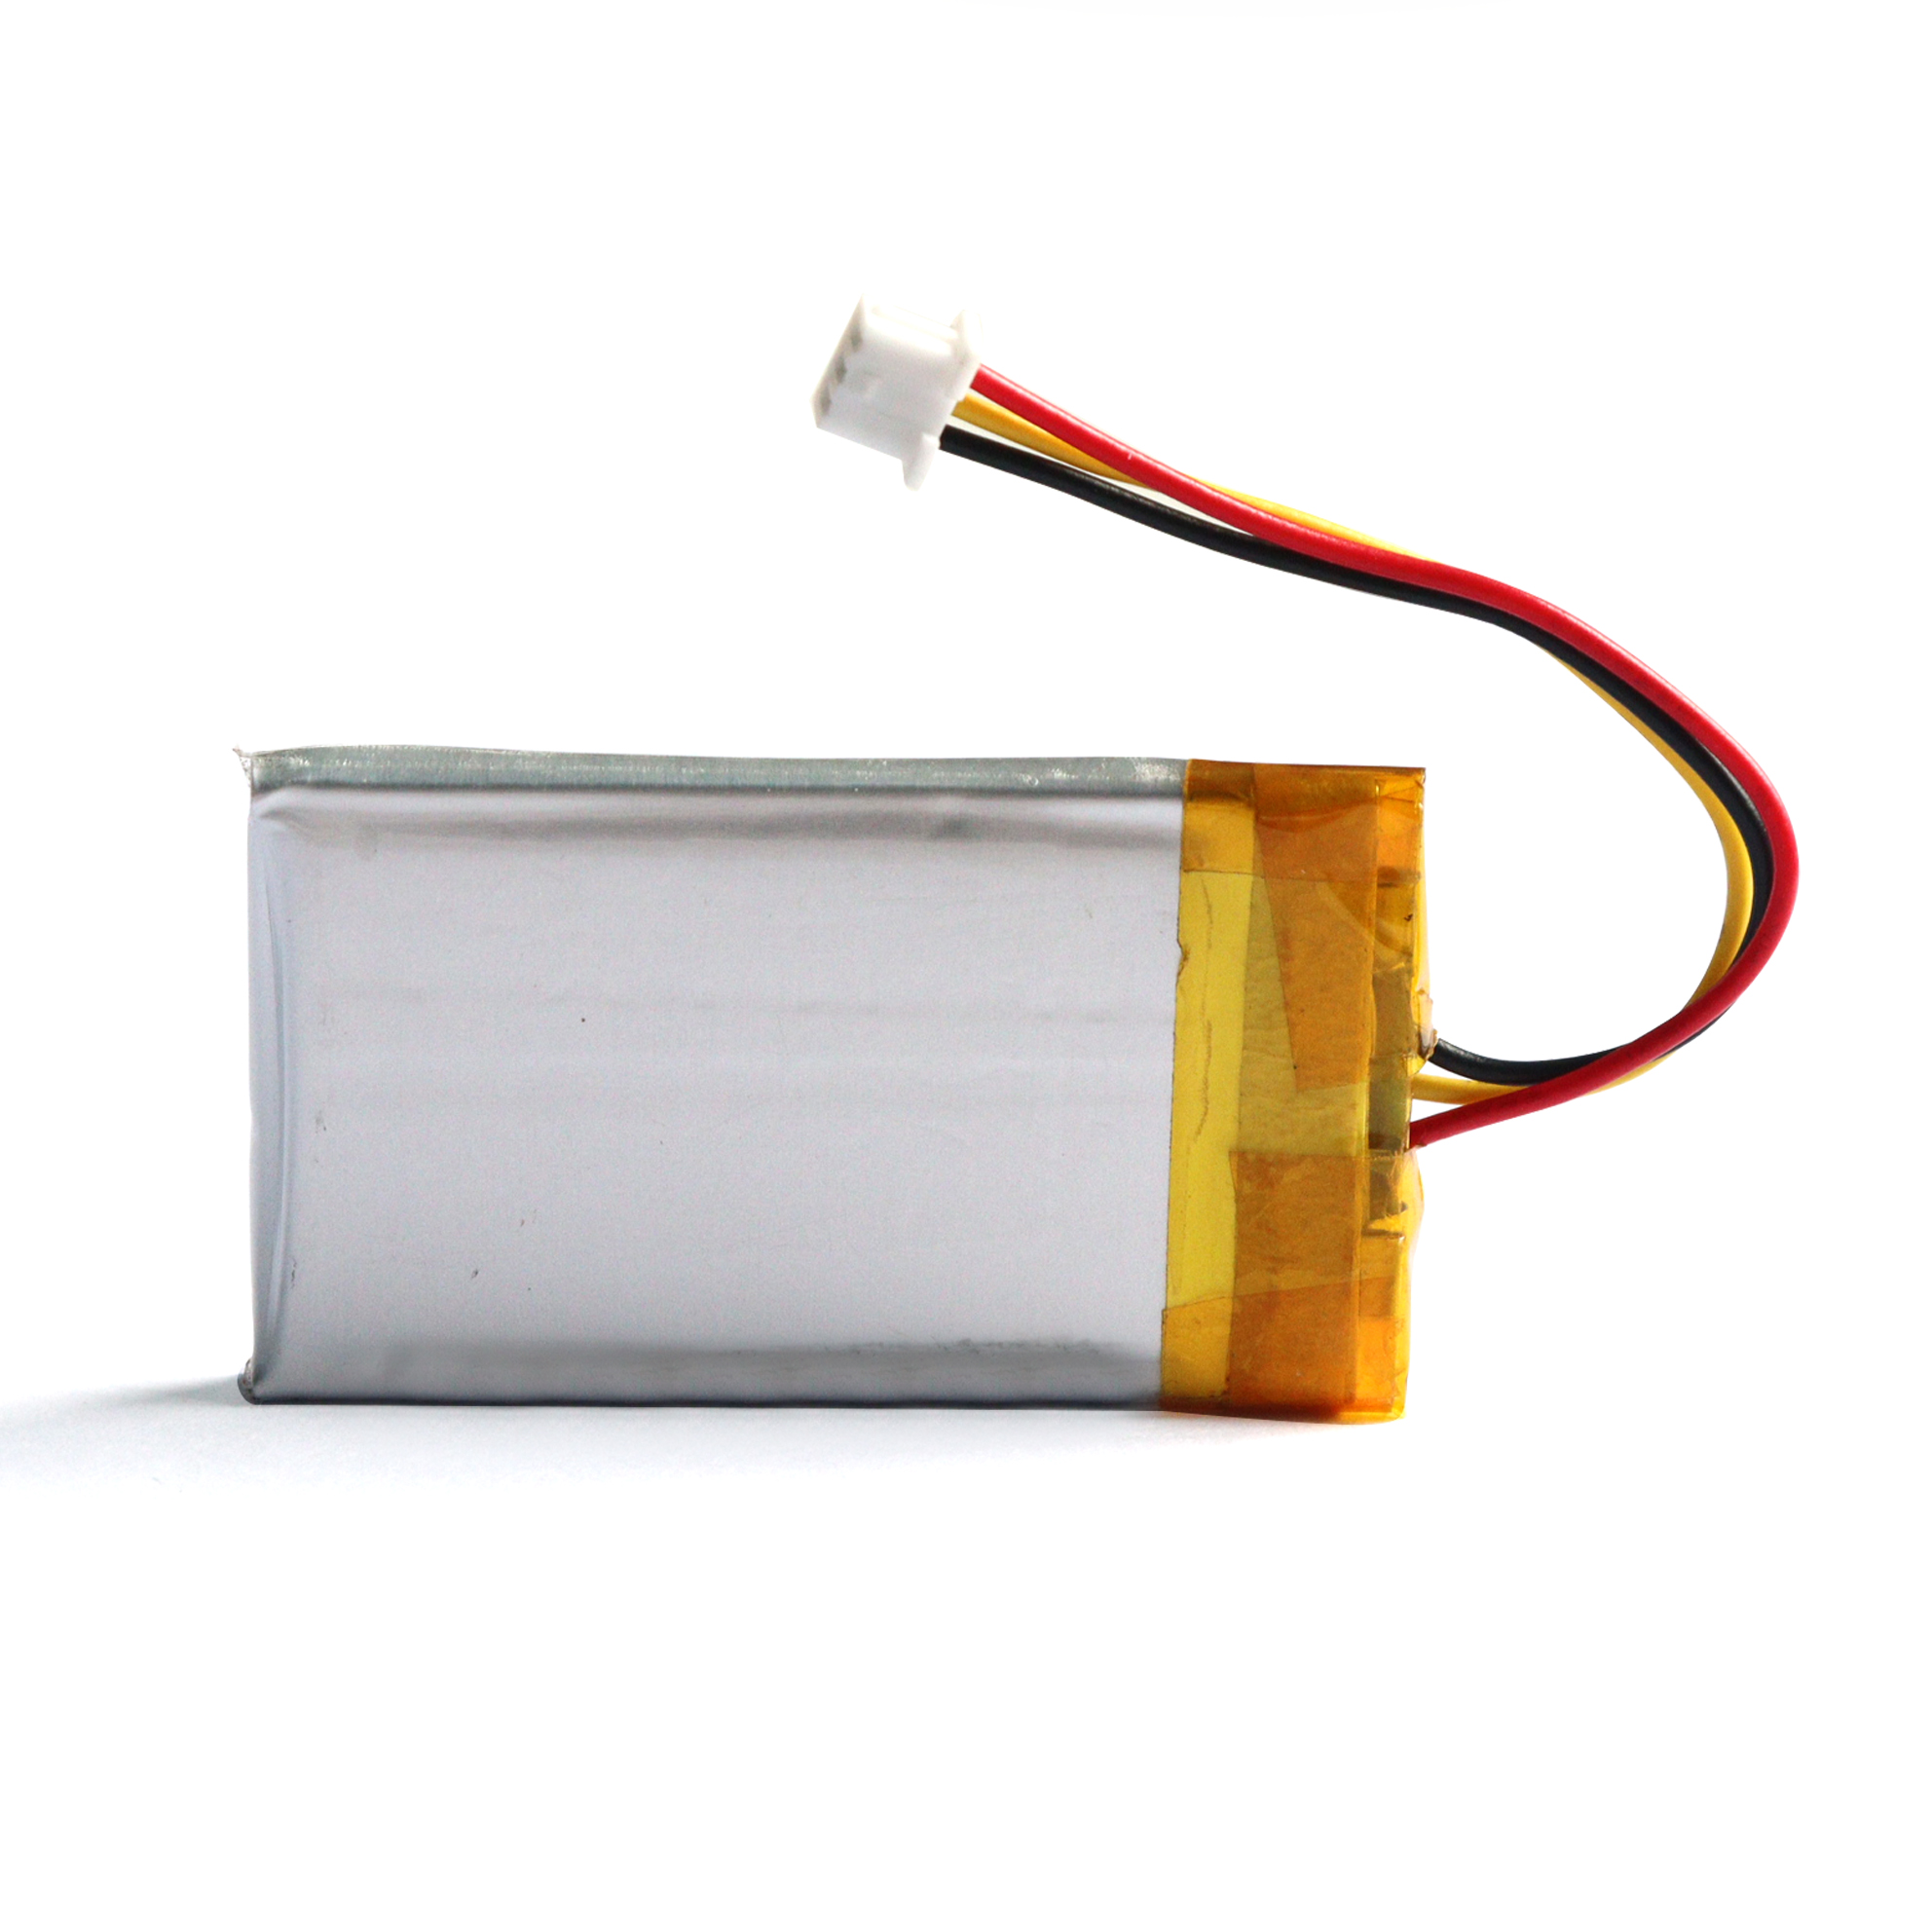 Rechargeable Lithium Polymer Battery 3.7V 1050mAh Lipo Battery for GPS Tracking